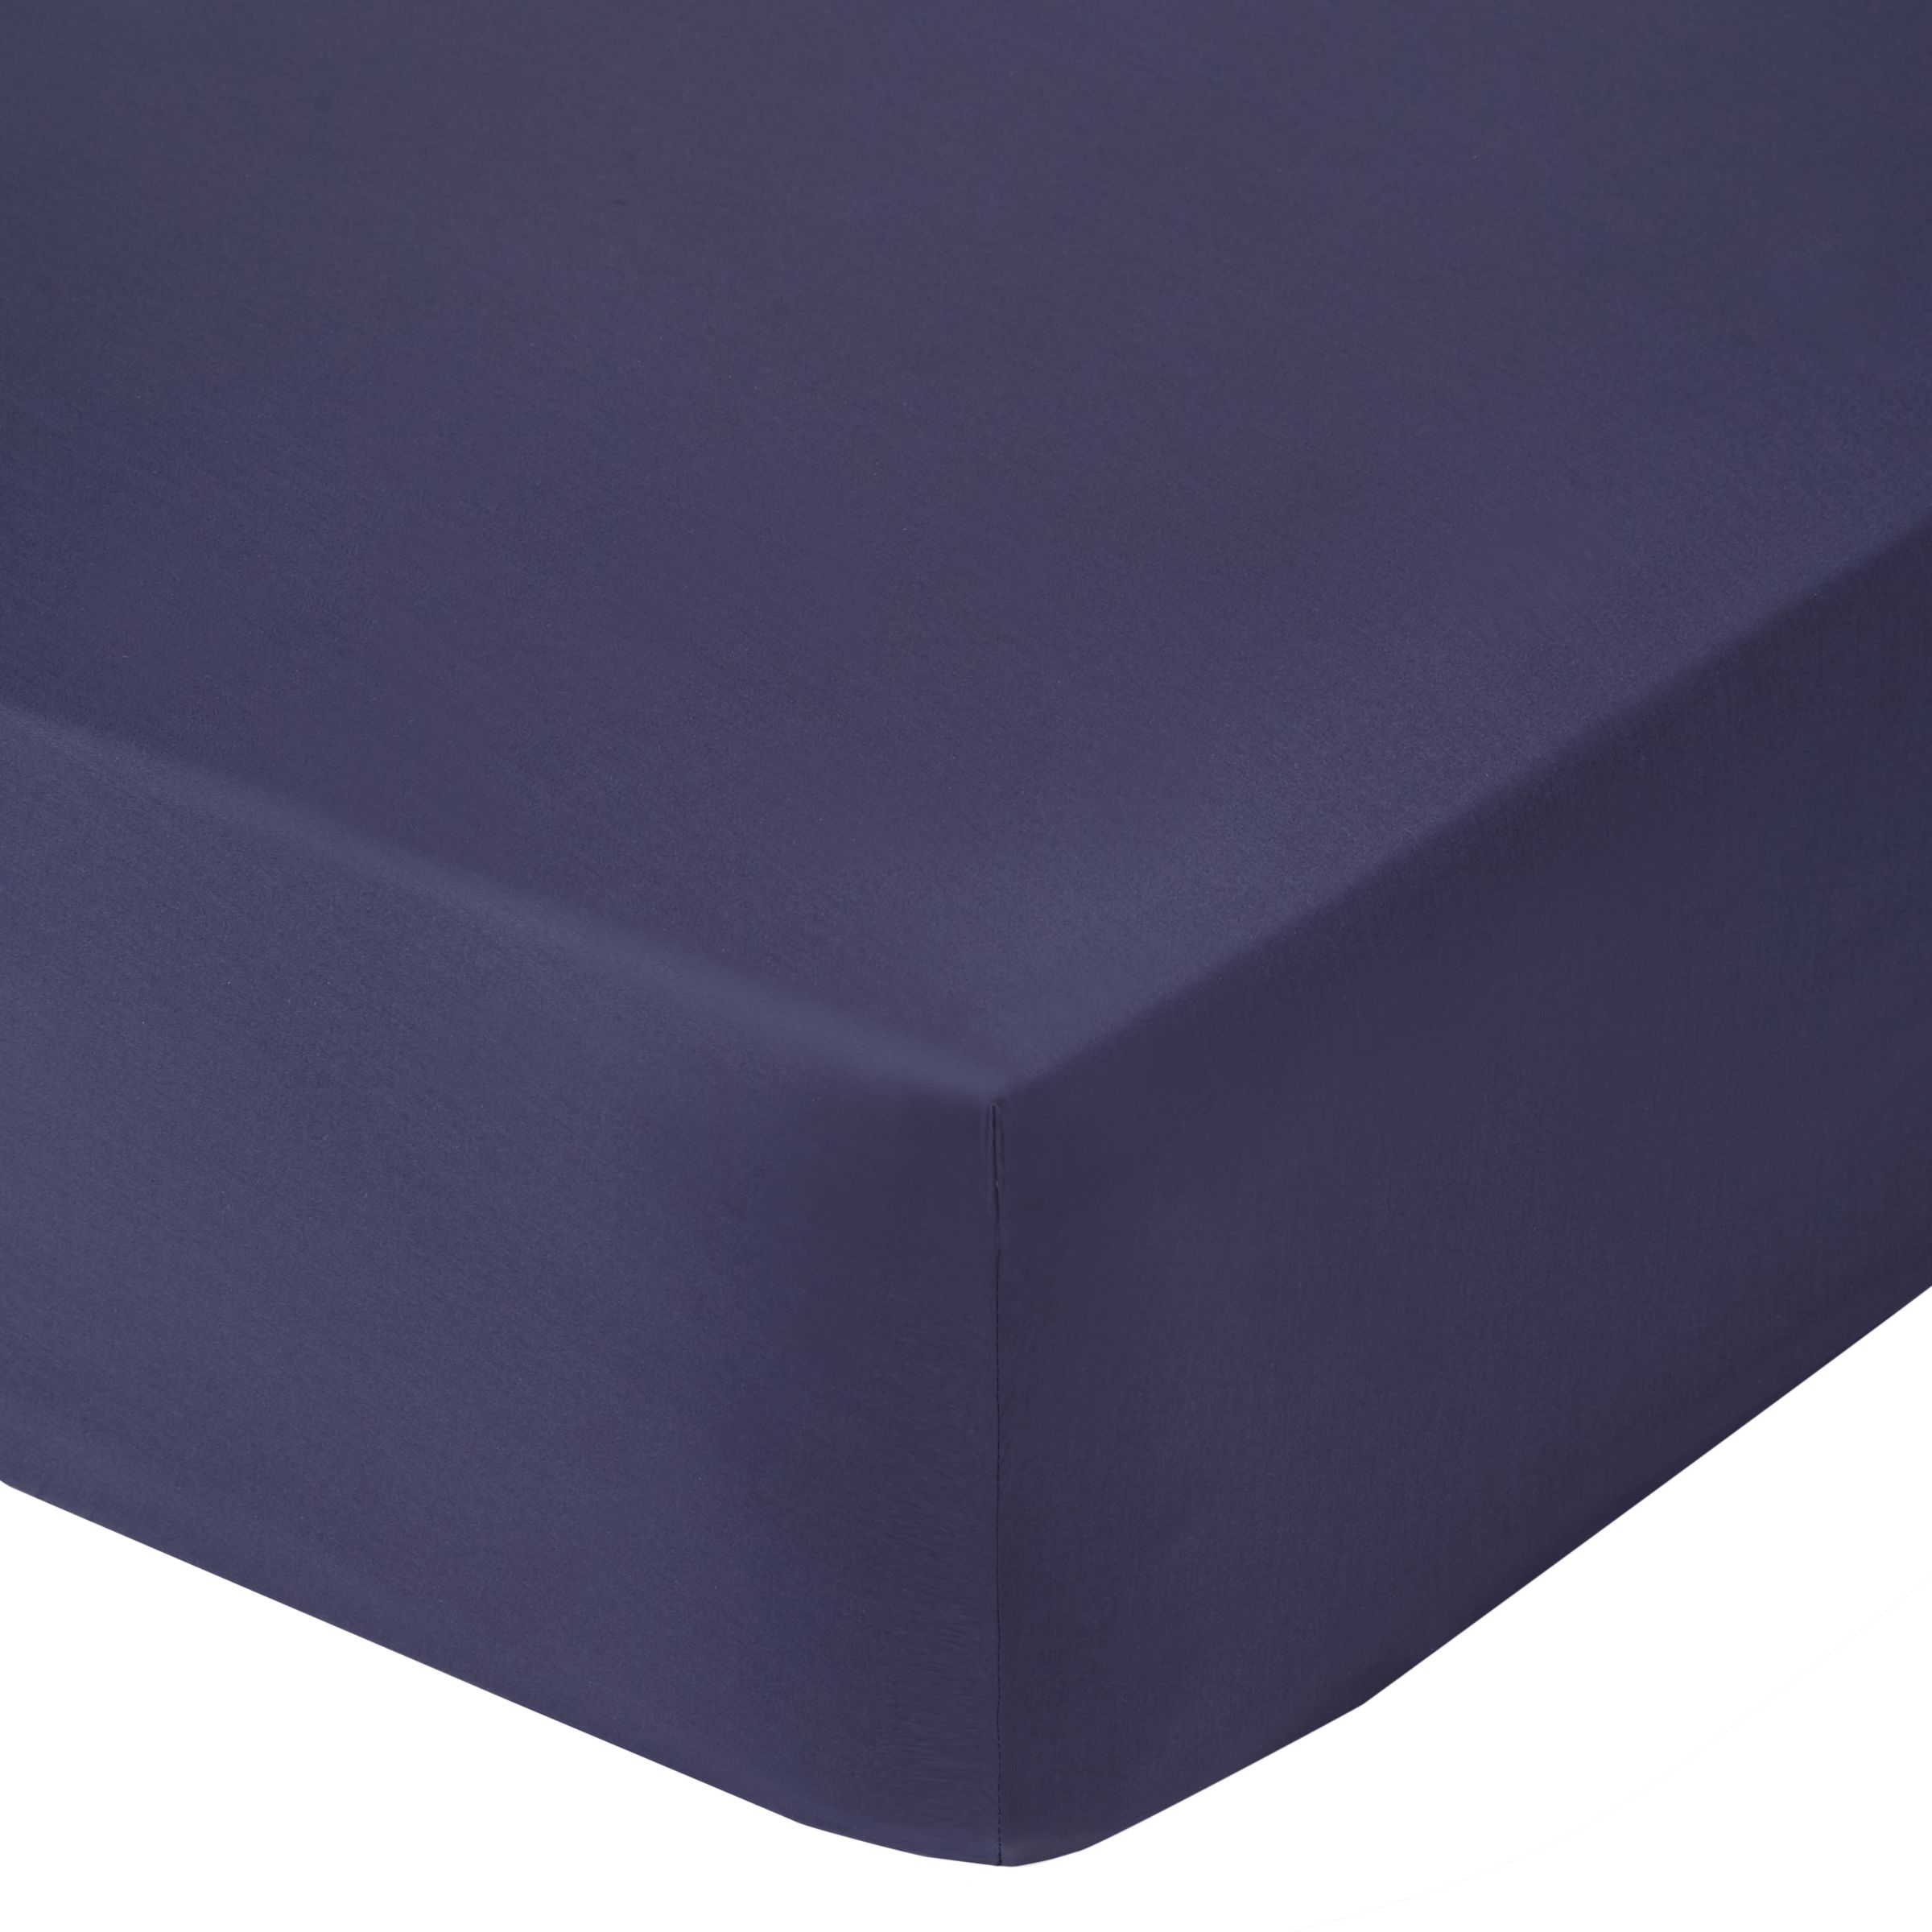 John Lewis 400 Thread Count Soft & Silky Egyptian Cotton Deep Fitted Sheet, Midnight Blue, King